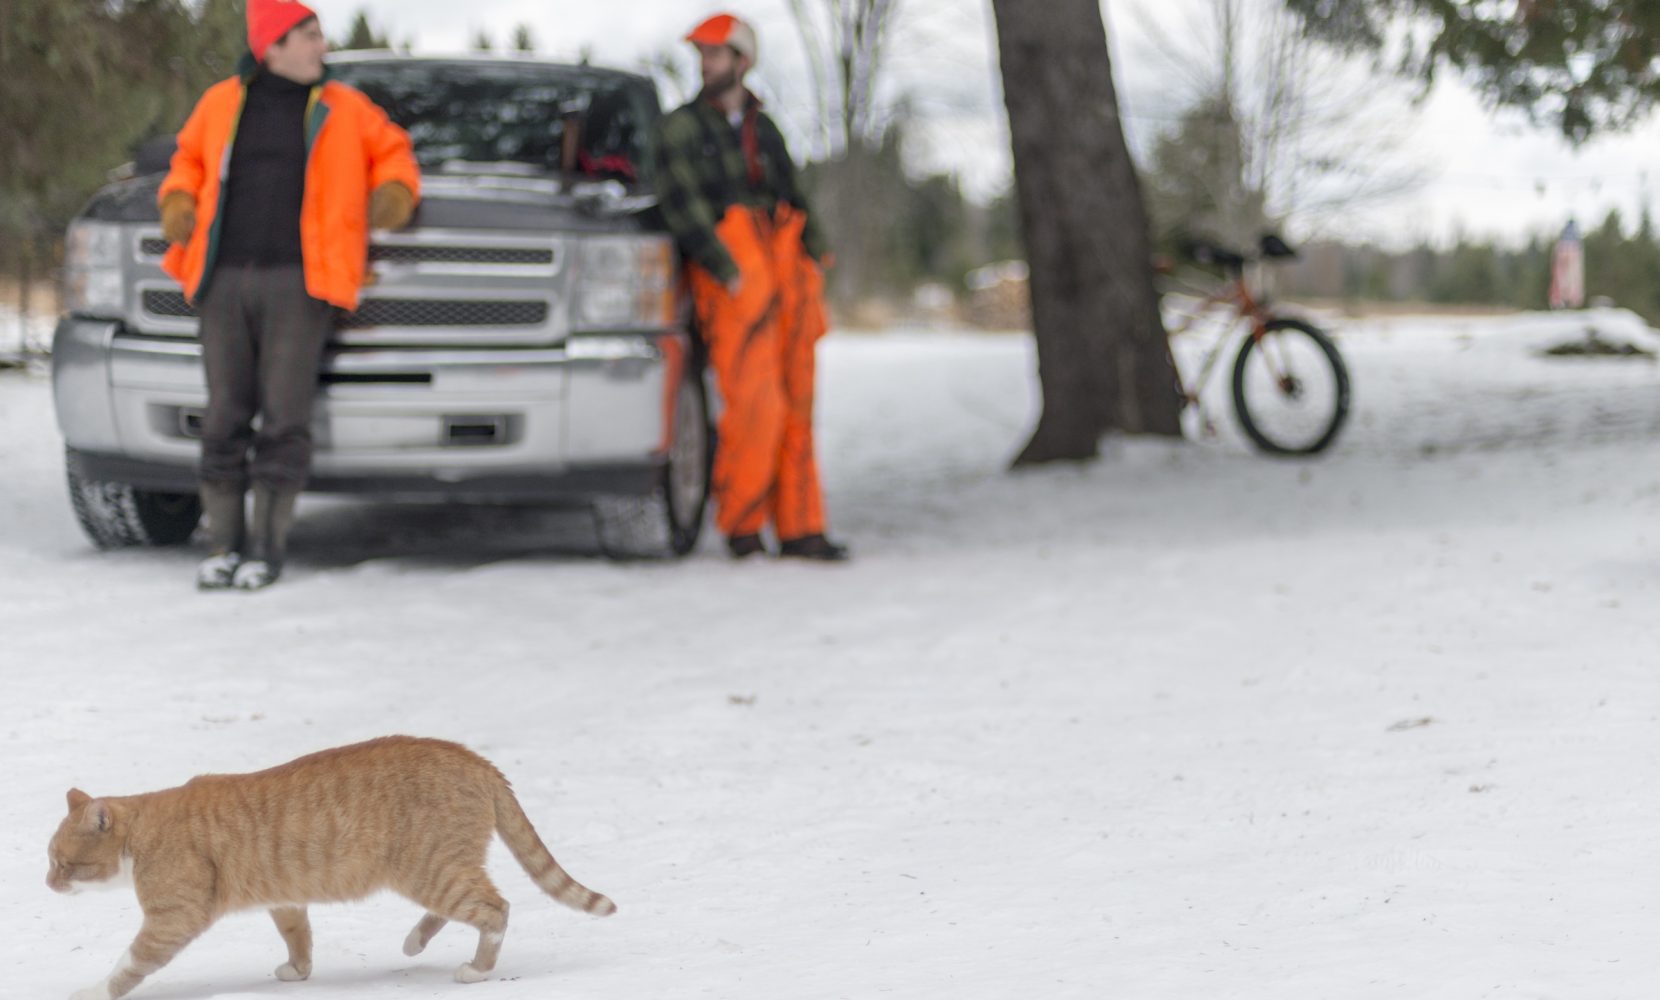 a cat walks through the snow in front of two deer hunters.